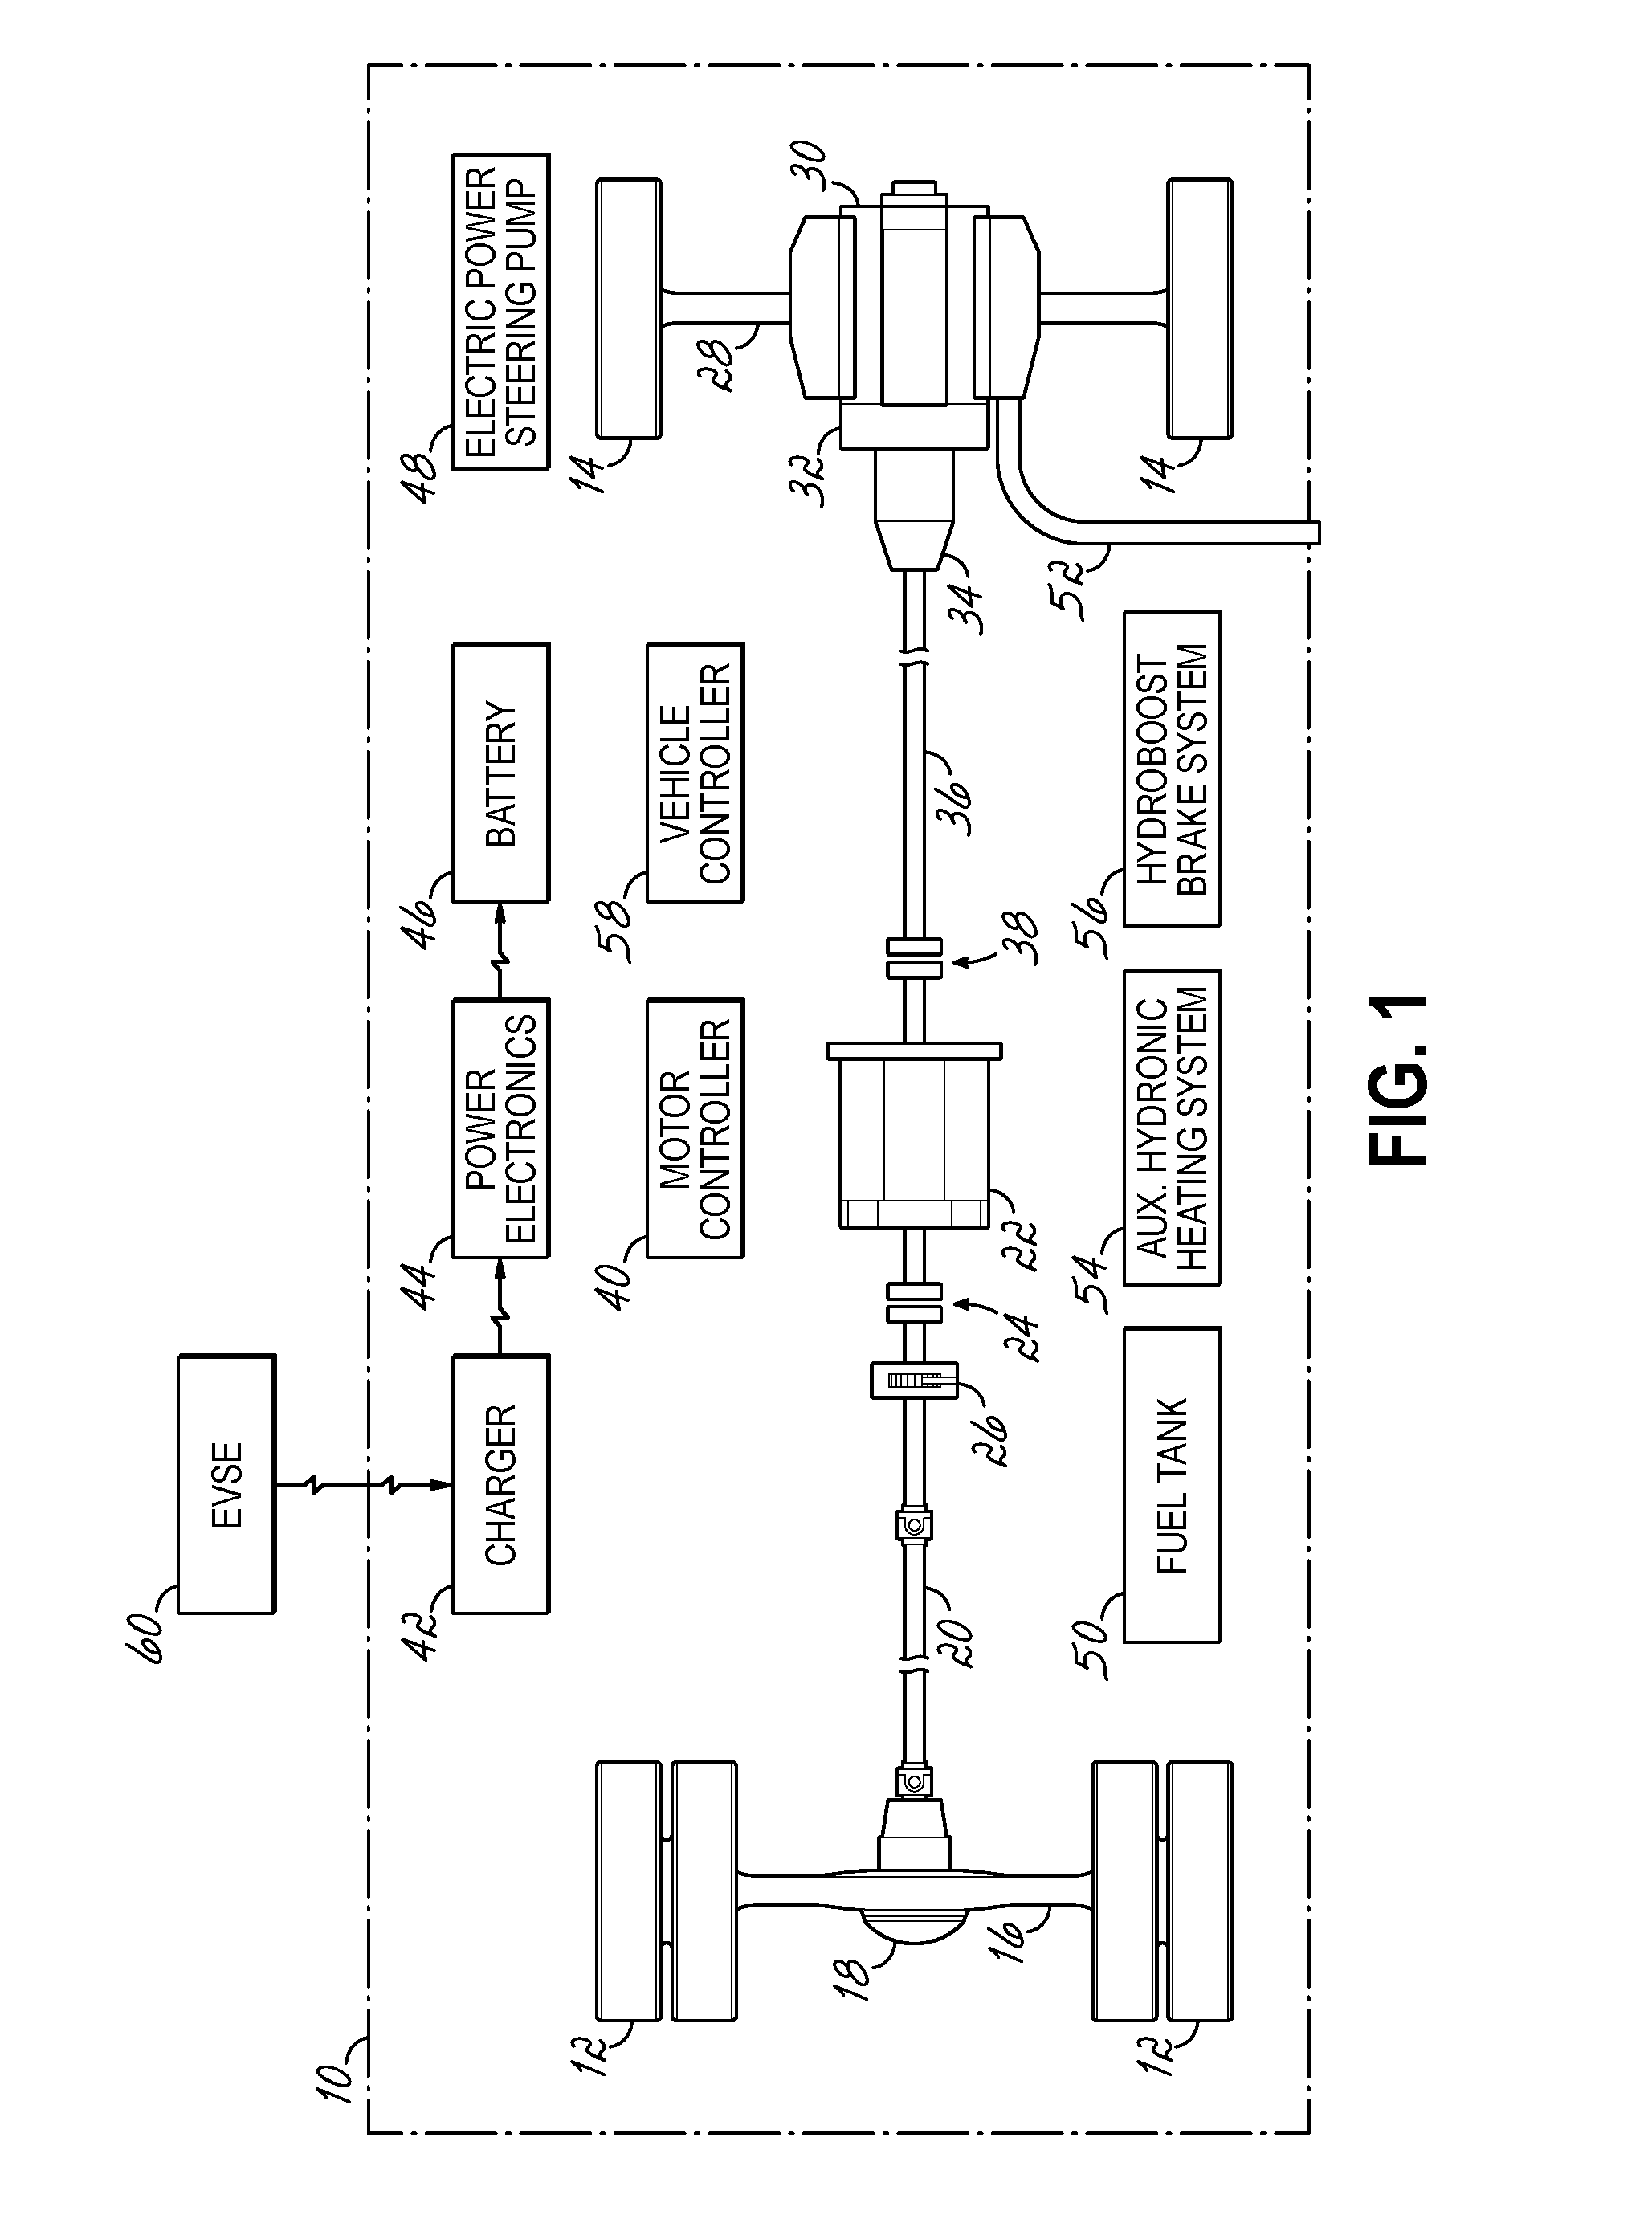 Onboard generator drive system for electric vehicles